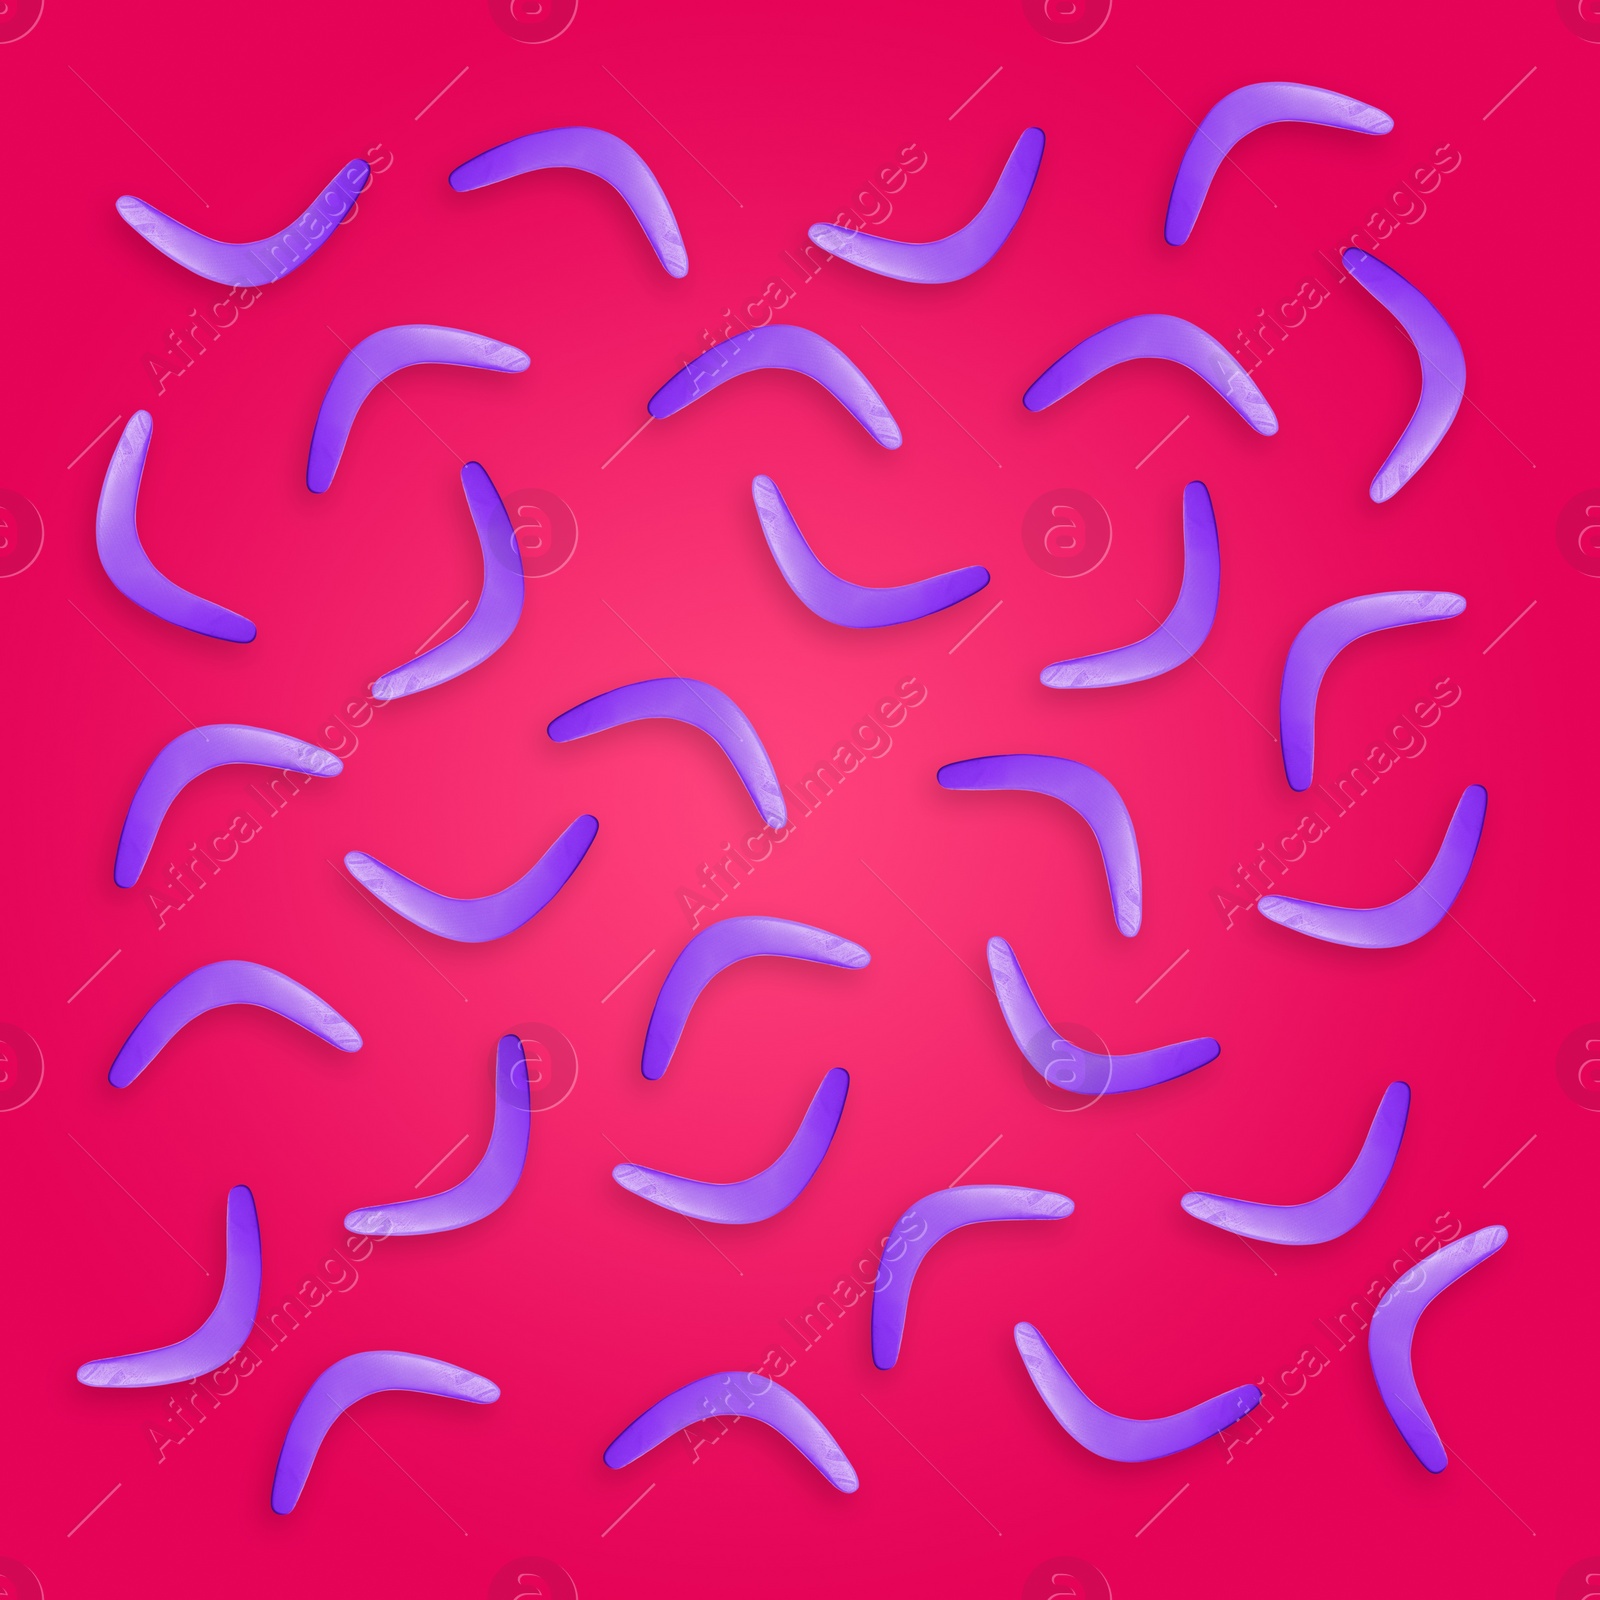 Image of Color boomerangs on pink background, flat lay